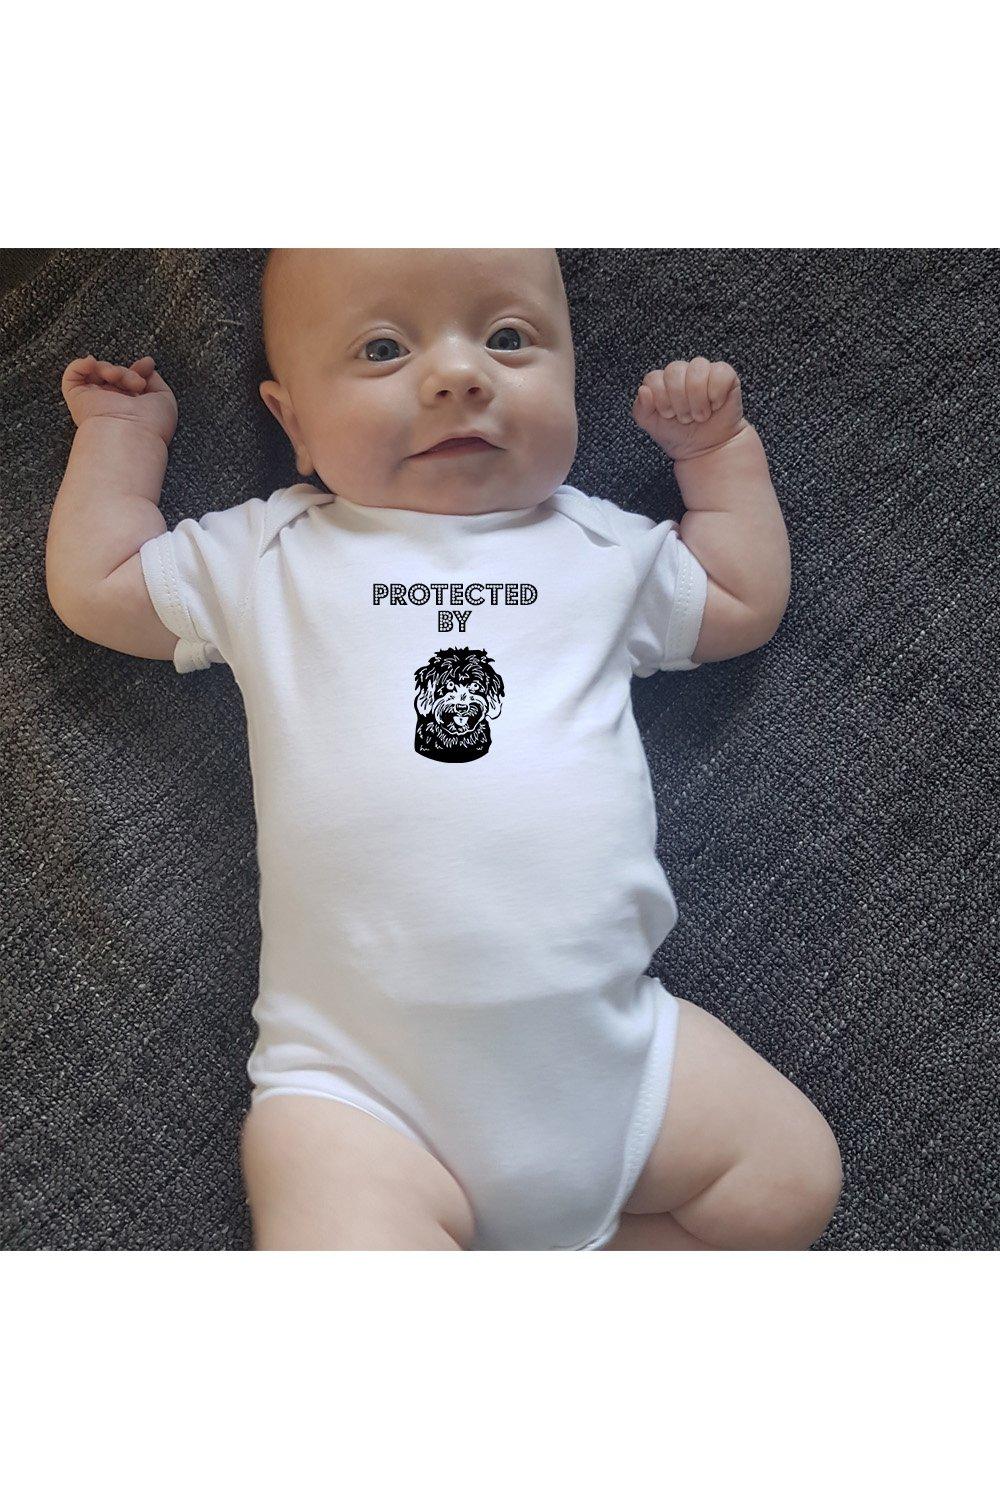 Protected by Cavapoo Dog Baby bodysuit / Baby Grow